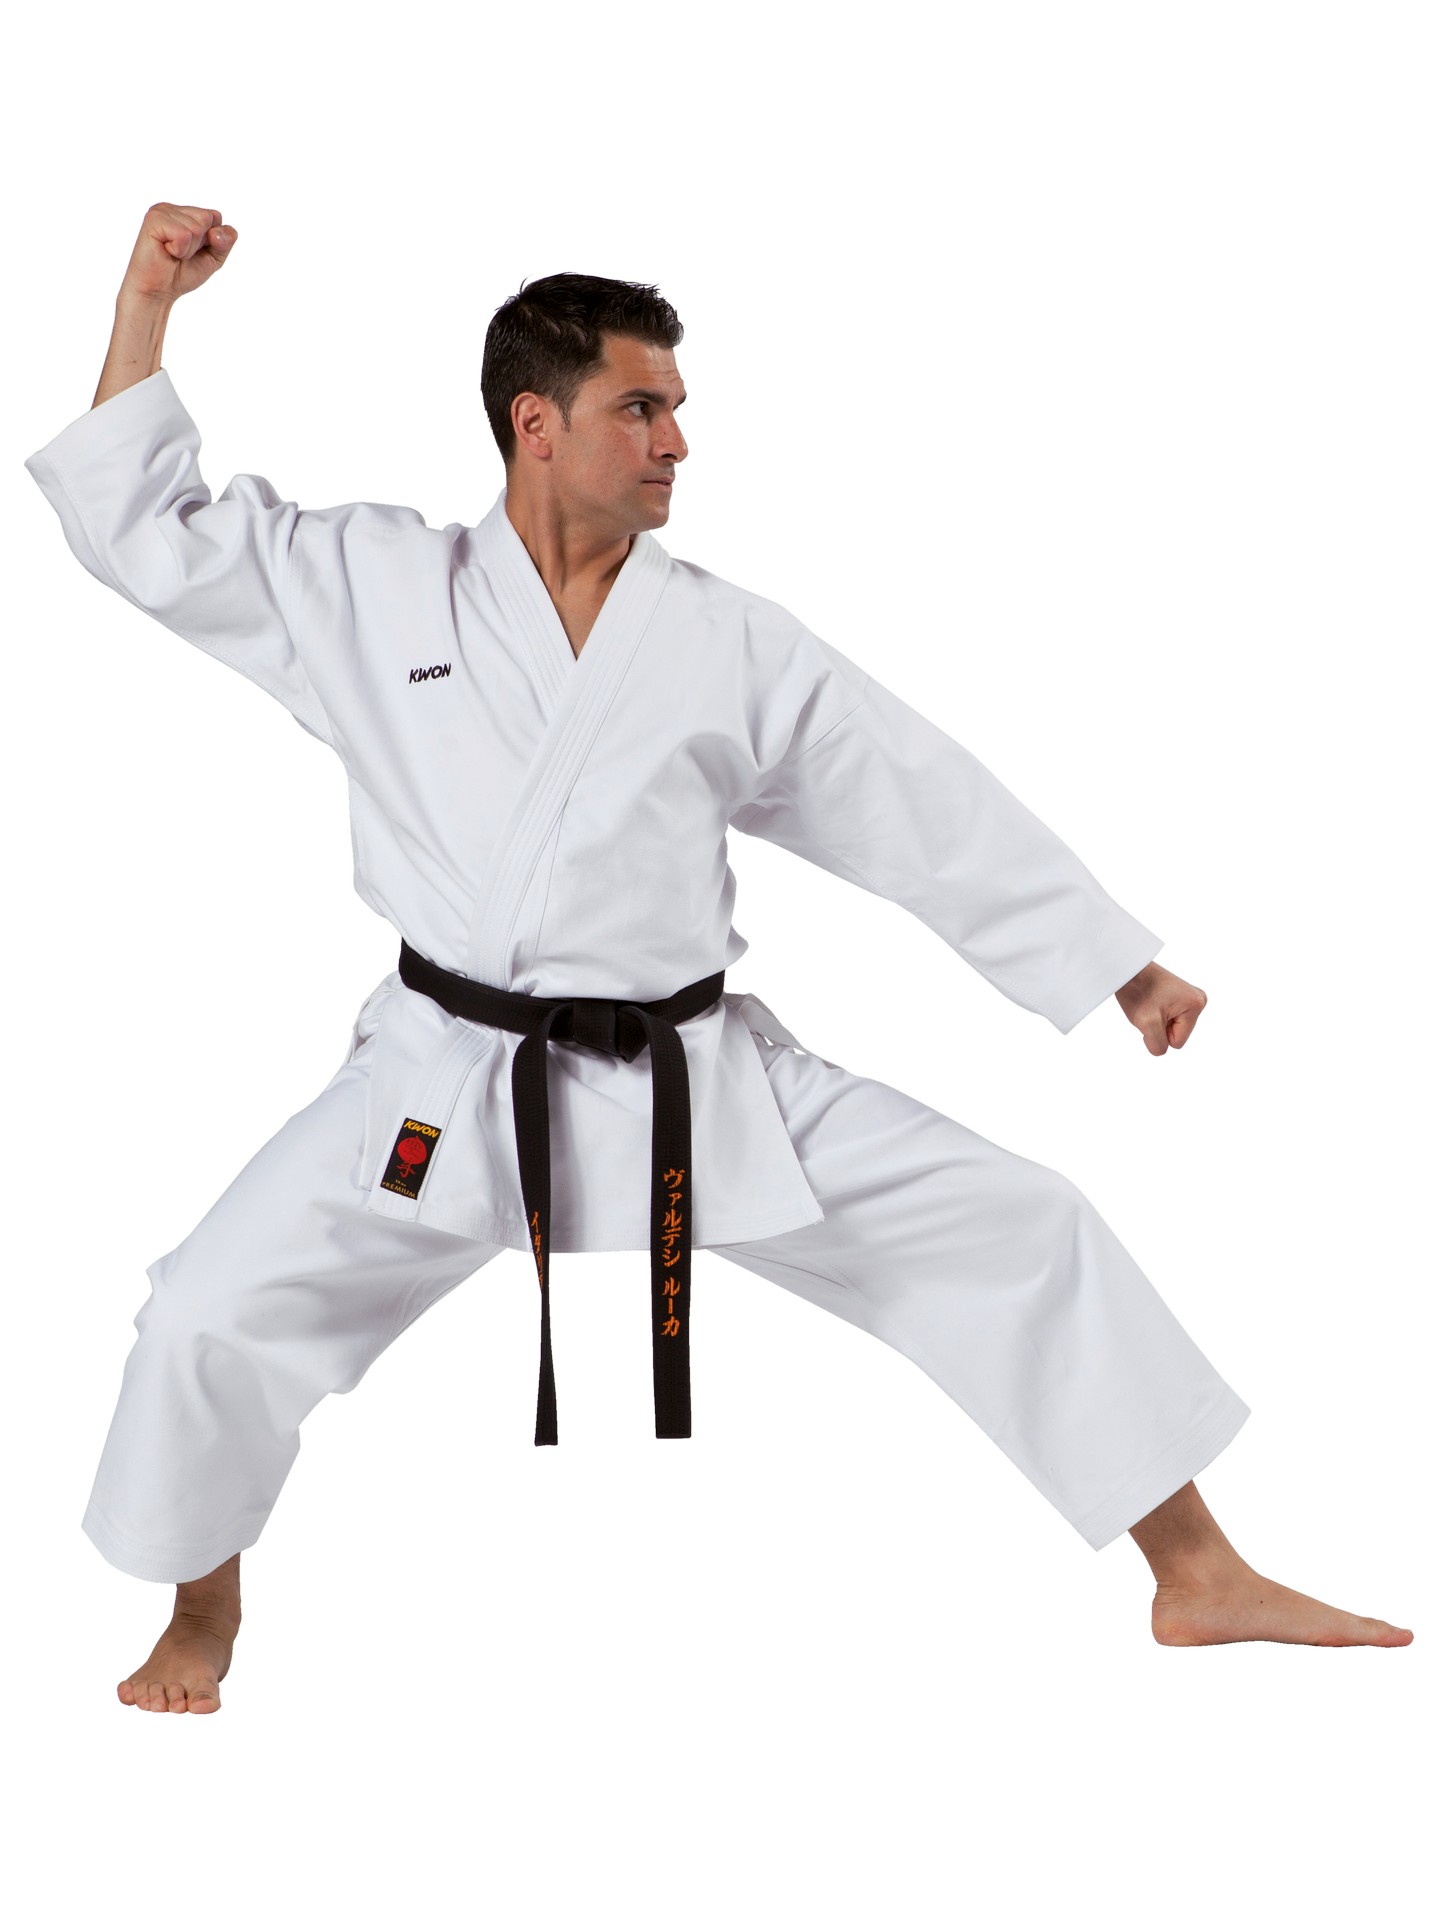 Basic moves in karate